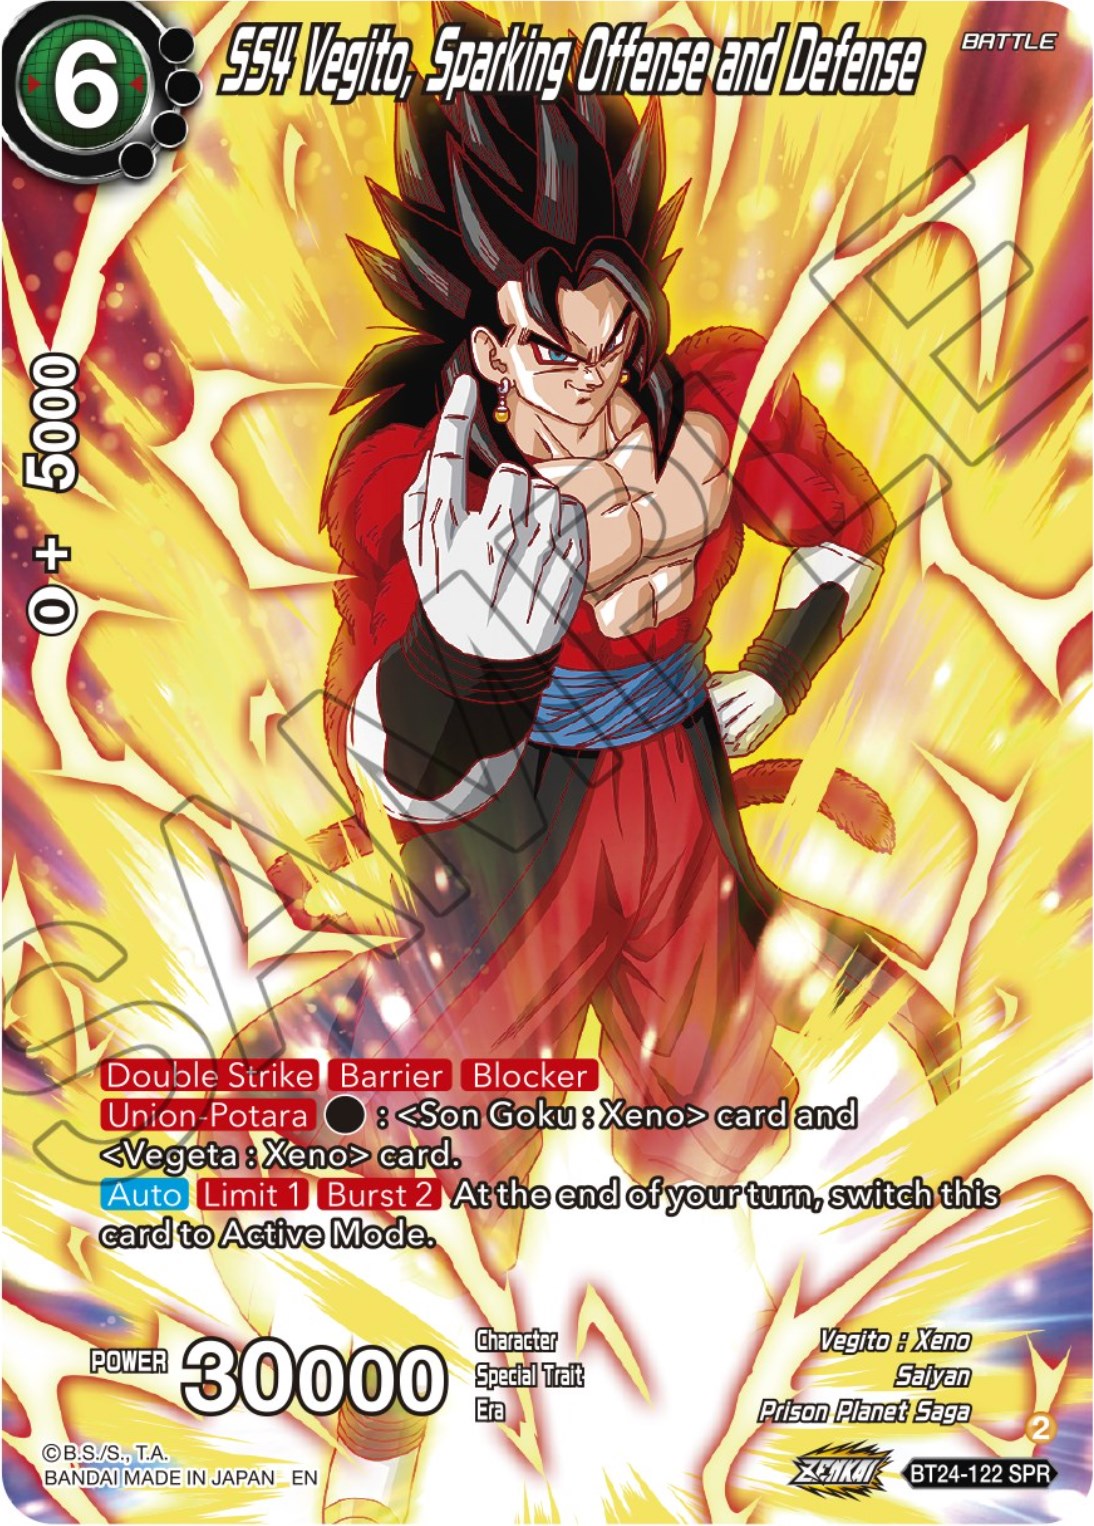 SS4 Vegito, Sparking Offense and Defense (SPR) (BT24-122) [Beyond Generations] | Pegasus Games WI